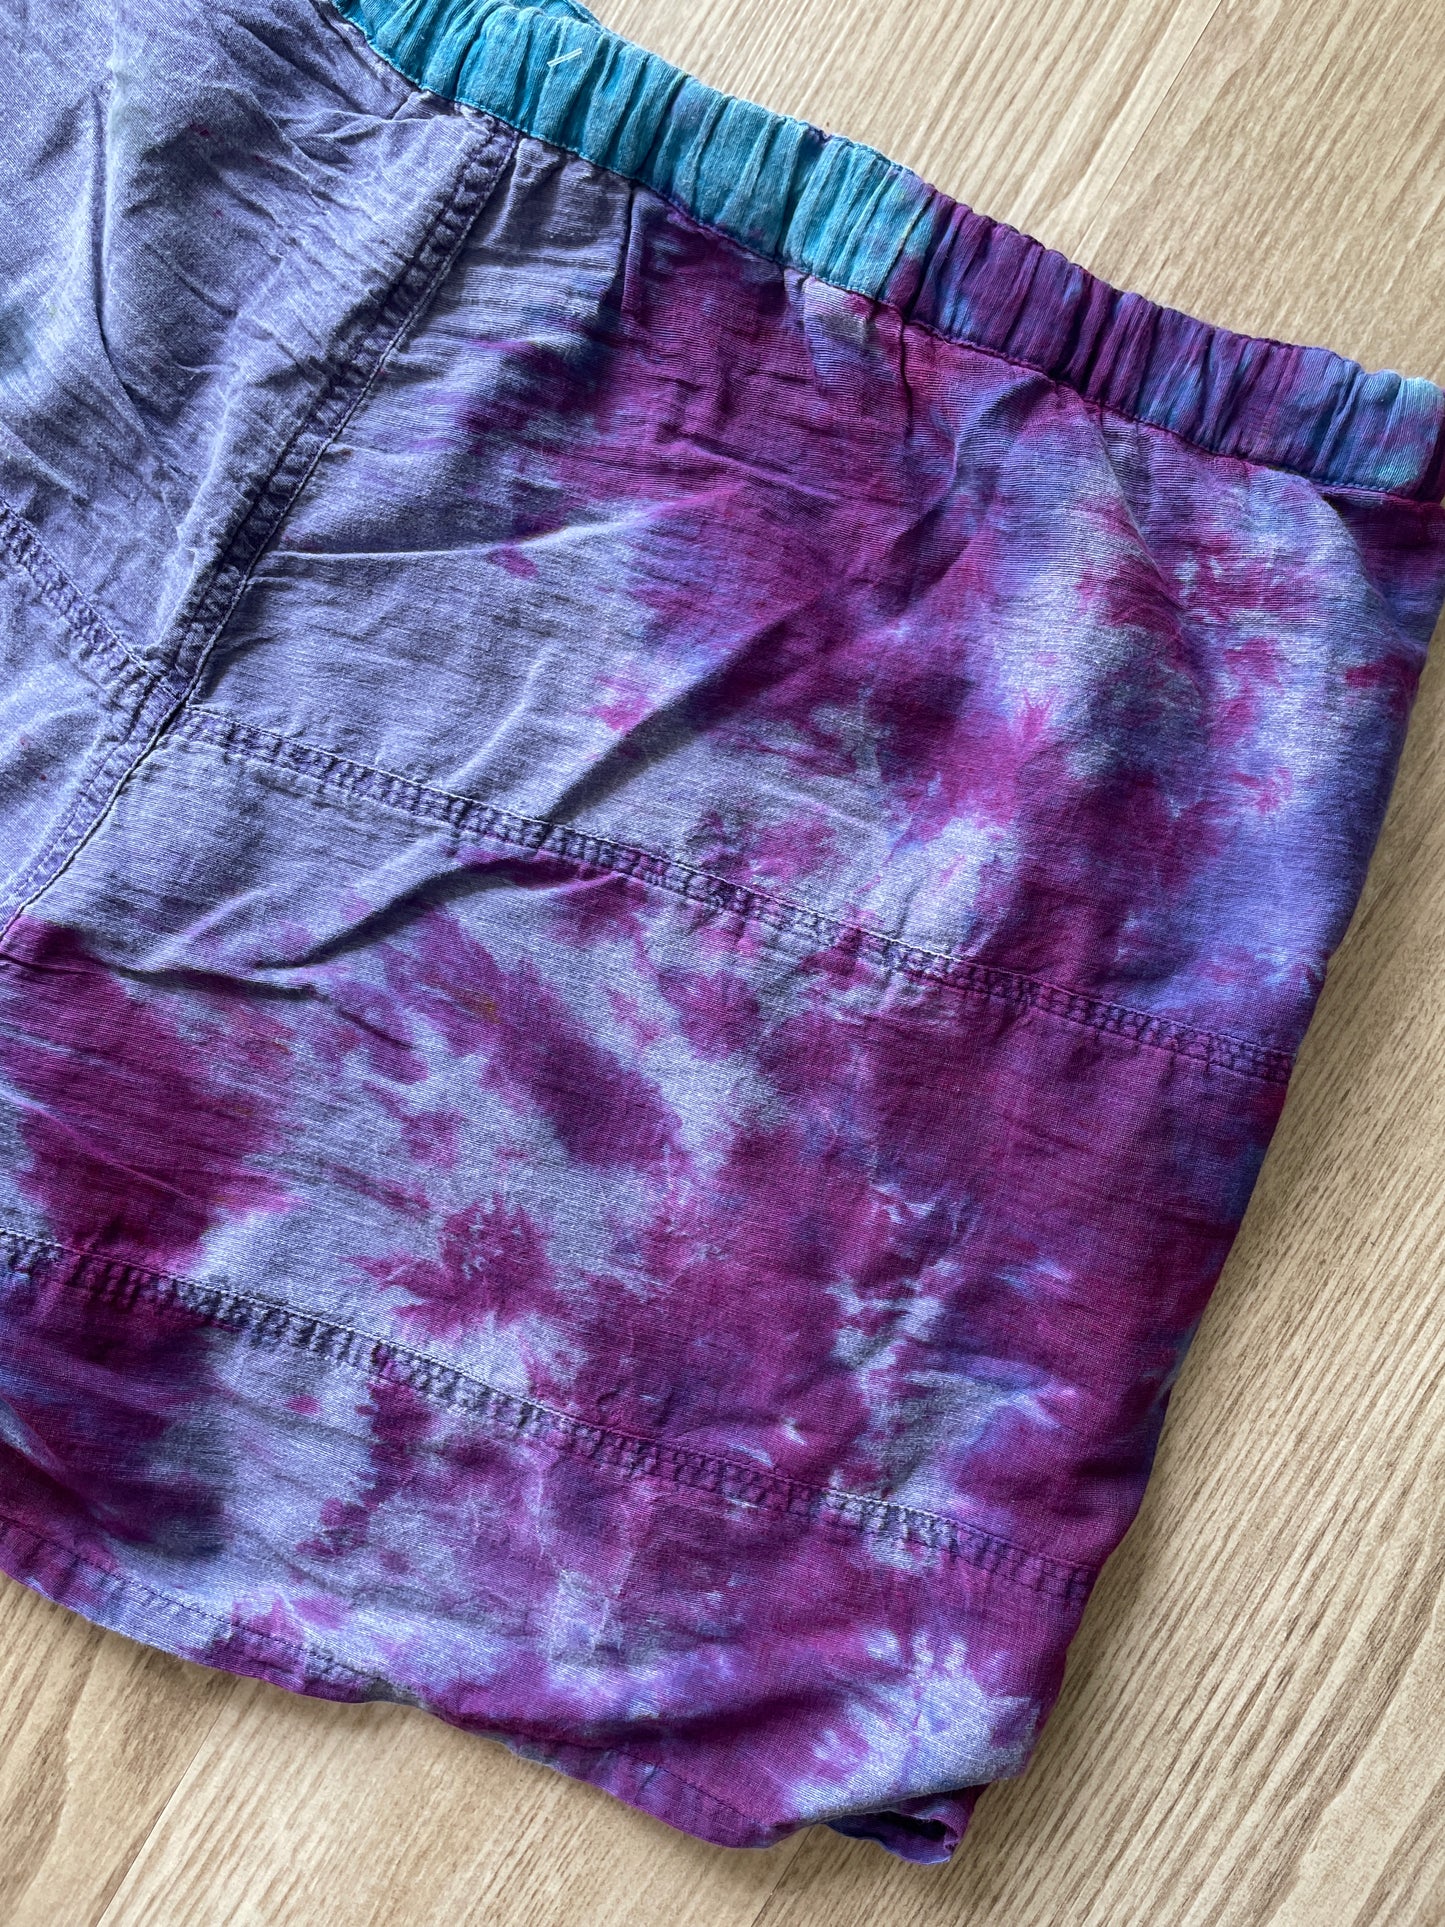 2XL Men’s Pacific Coast Highway Tie Dye Vintage Chino Shorts | One-Of-a-Kind Upcycled Blue and Purple Crumpled Casual Shorts